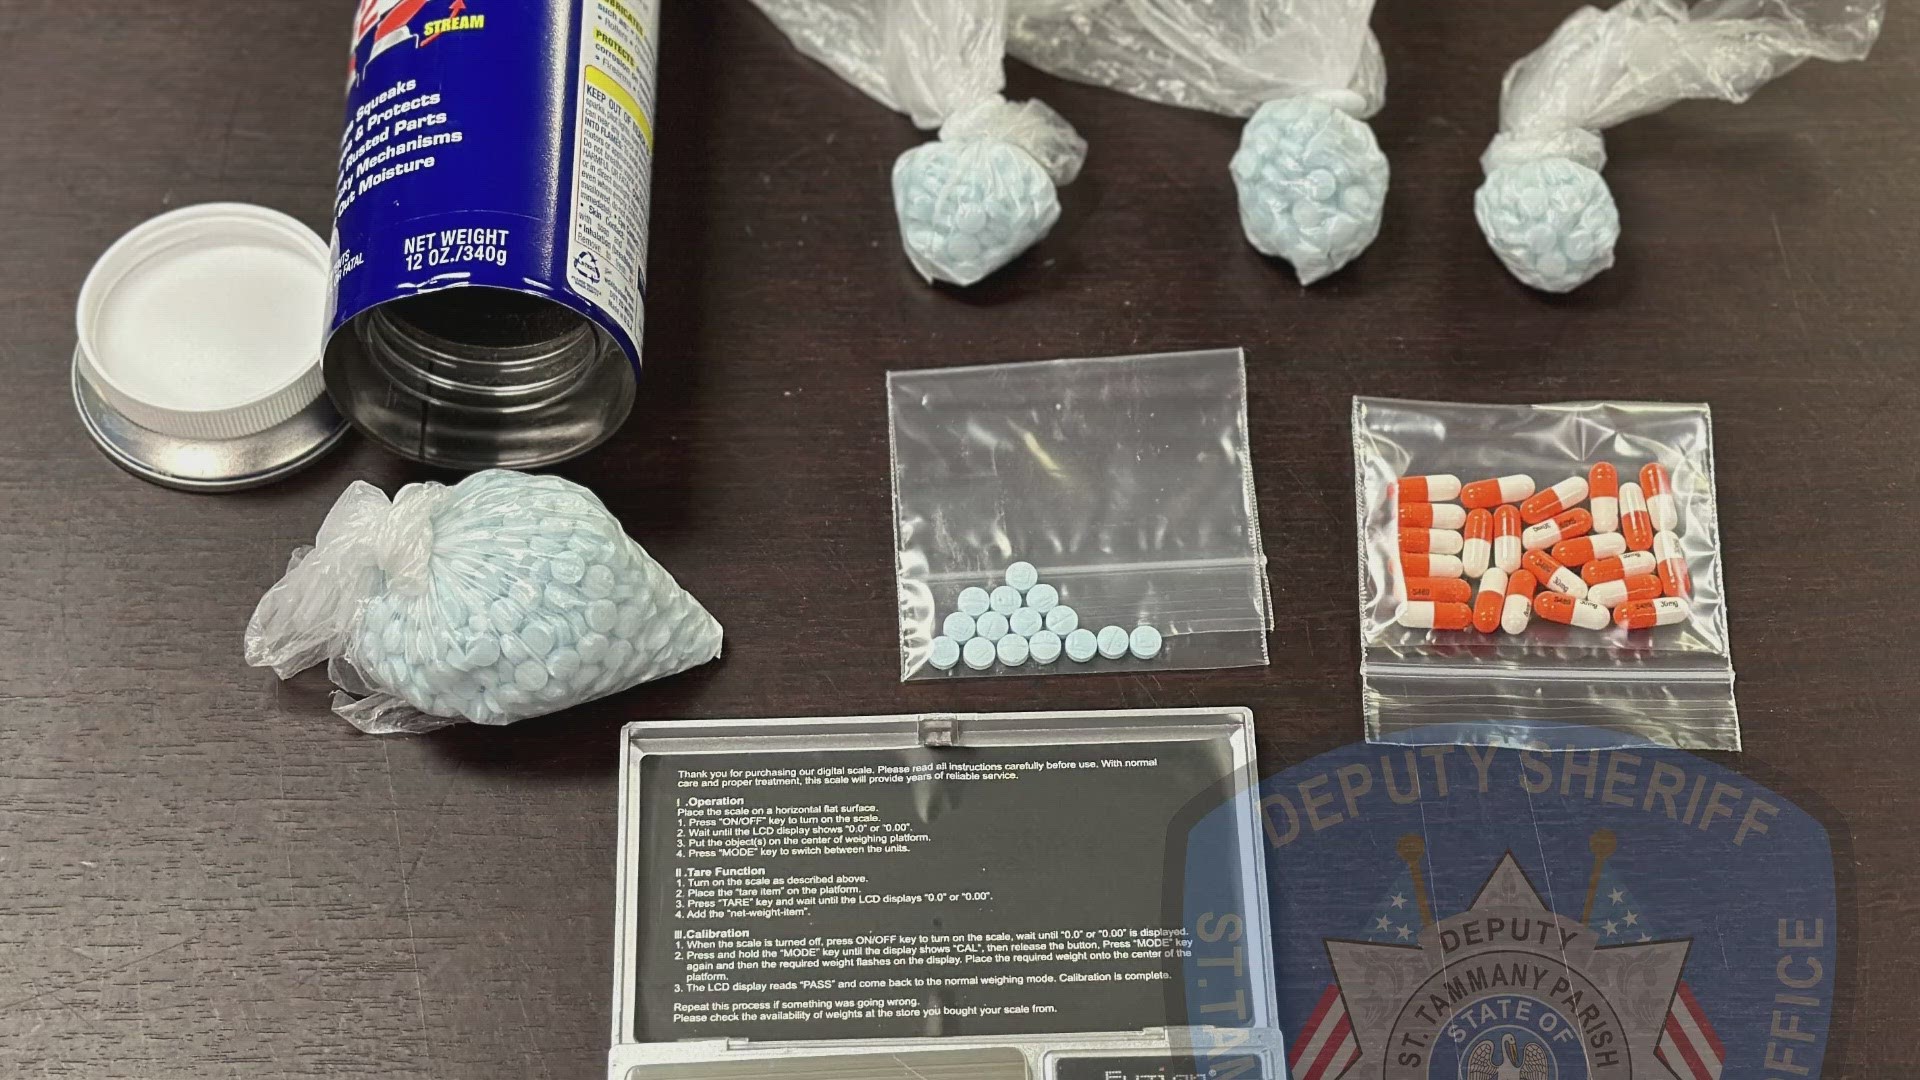 St. Tammany Parish Sheriff's Office announced on Tuesday the seizure of approximately 780 fentanyl pills during the arrest of 24-year-old Derrick McDowell.